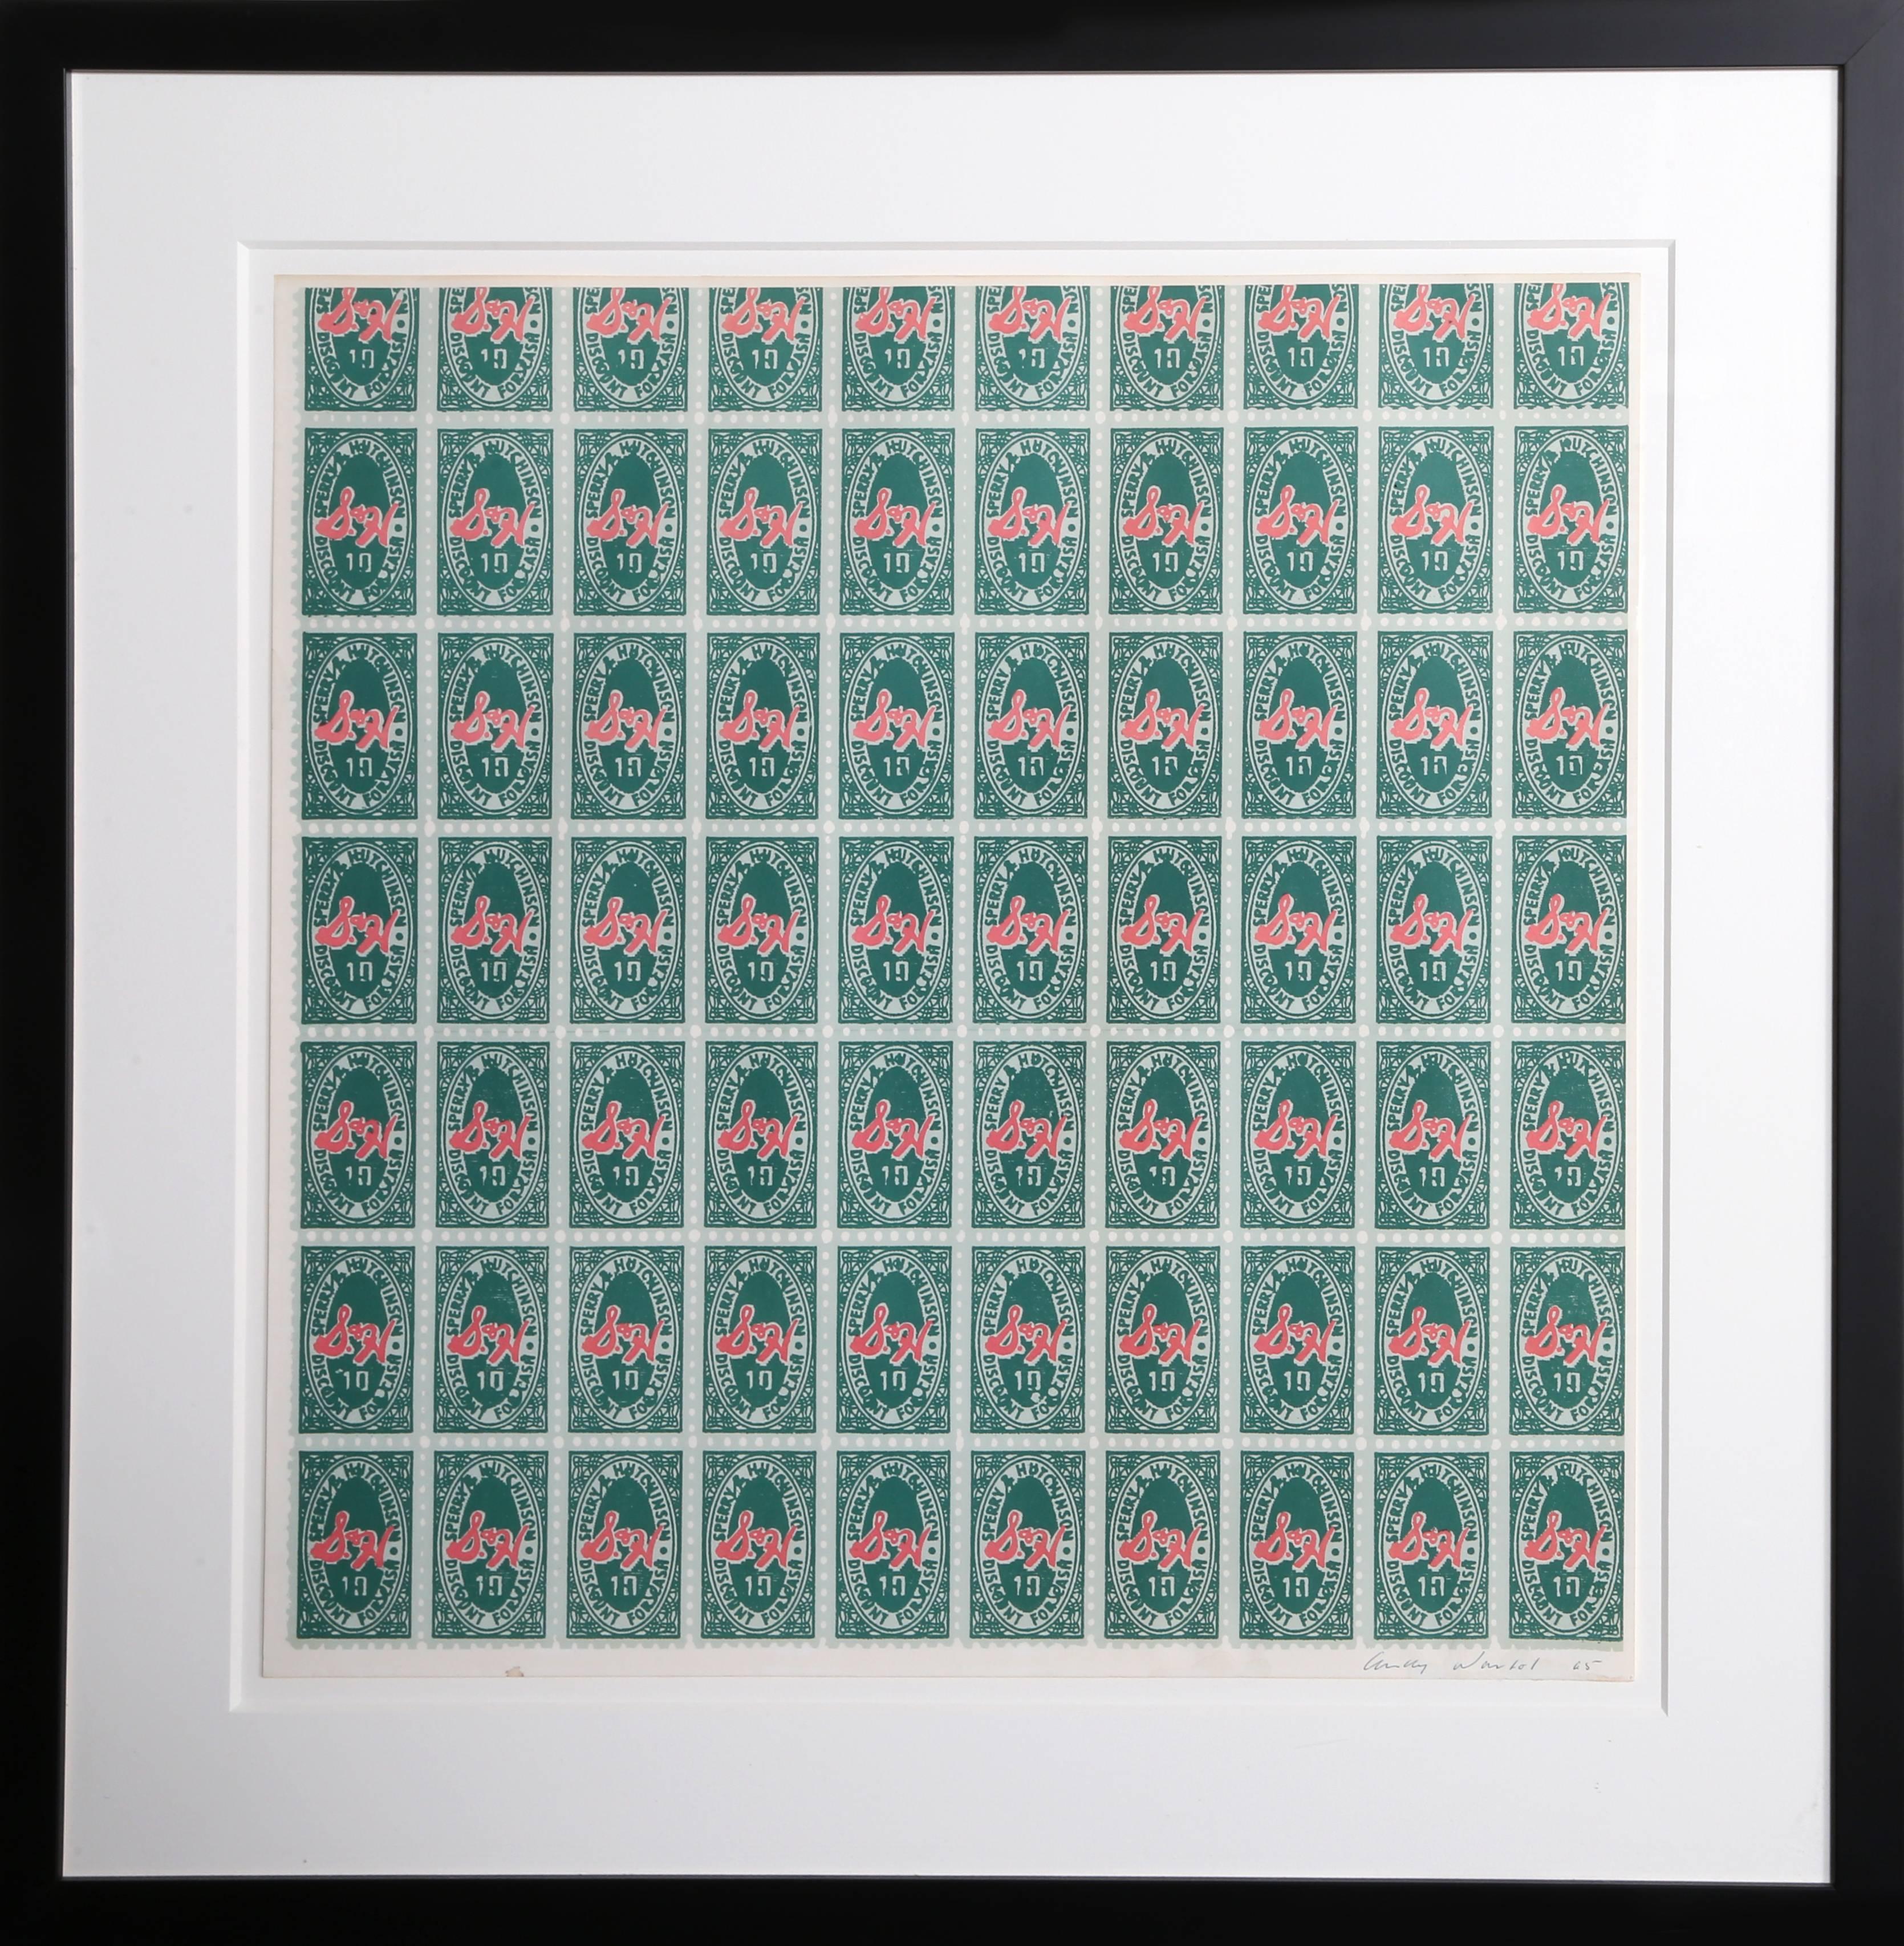 Andy Warhol Abstract Print - S&H Green Stamps (FS. II.9)